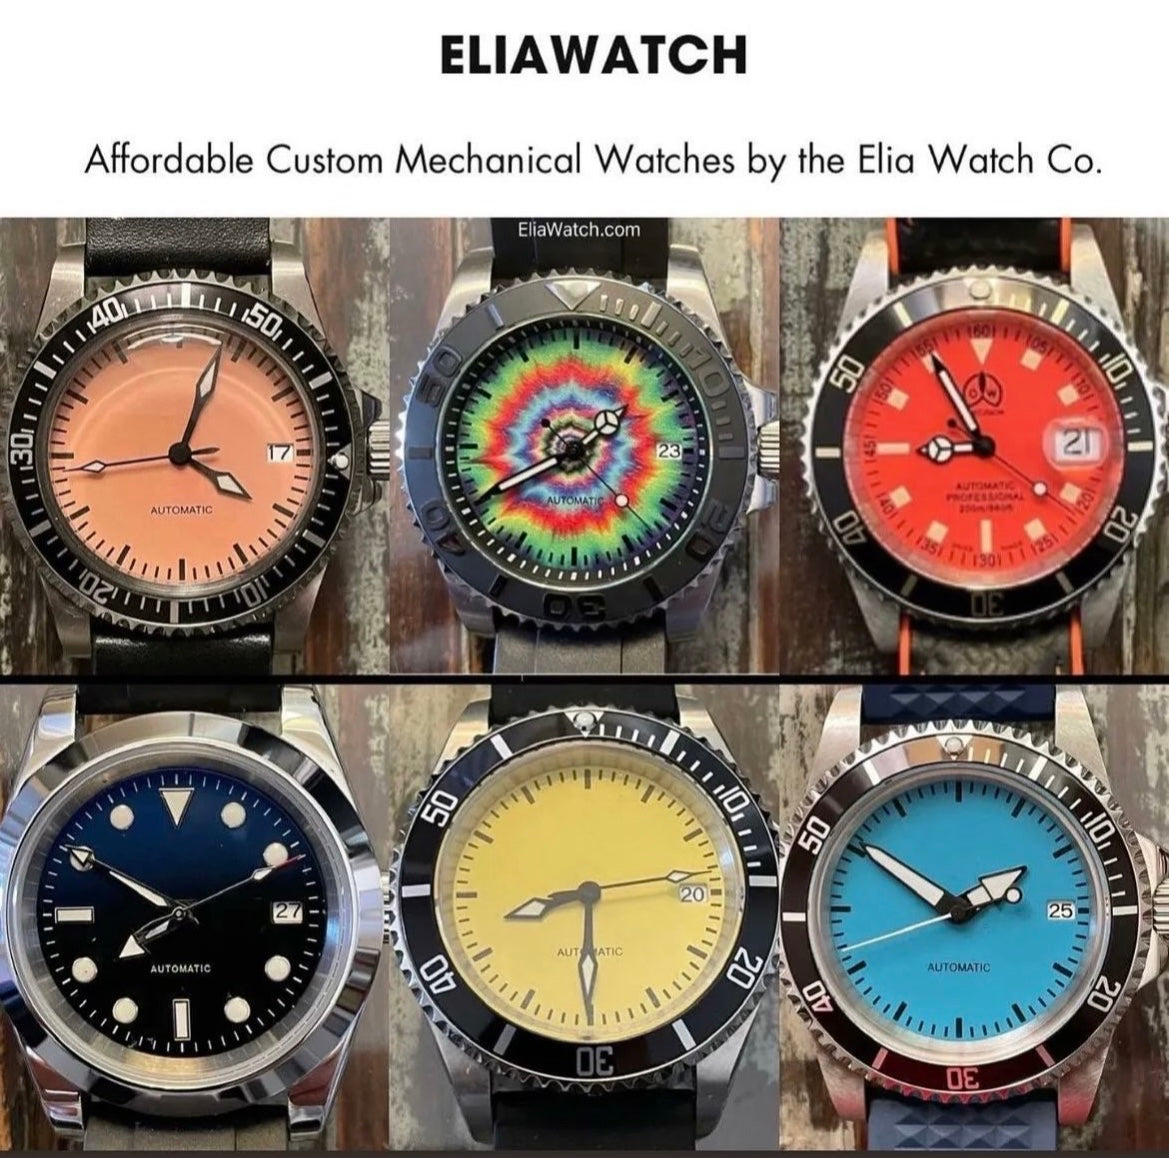 Elia Watches are Mechanical Watches with Style